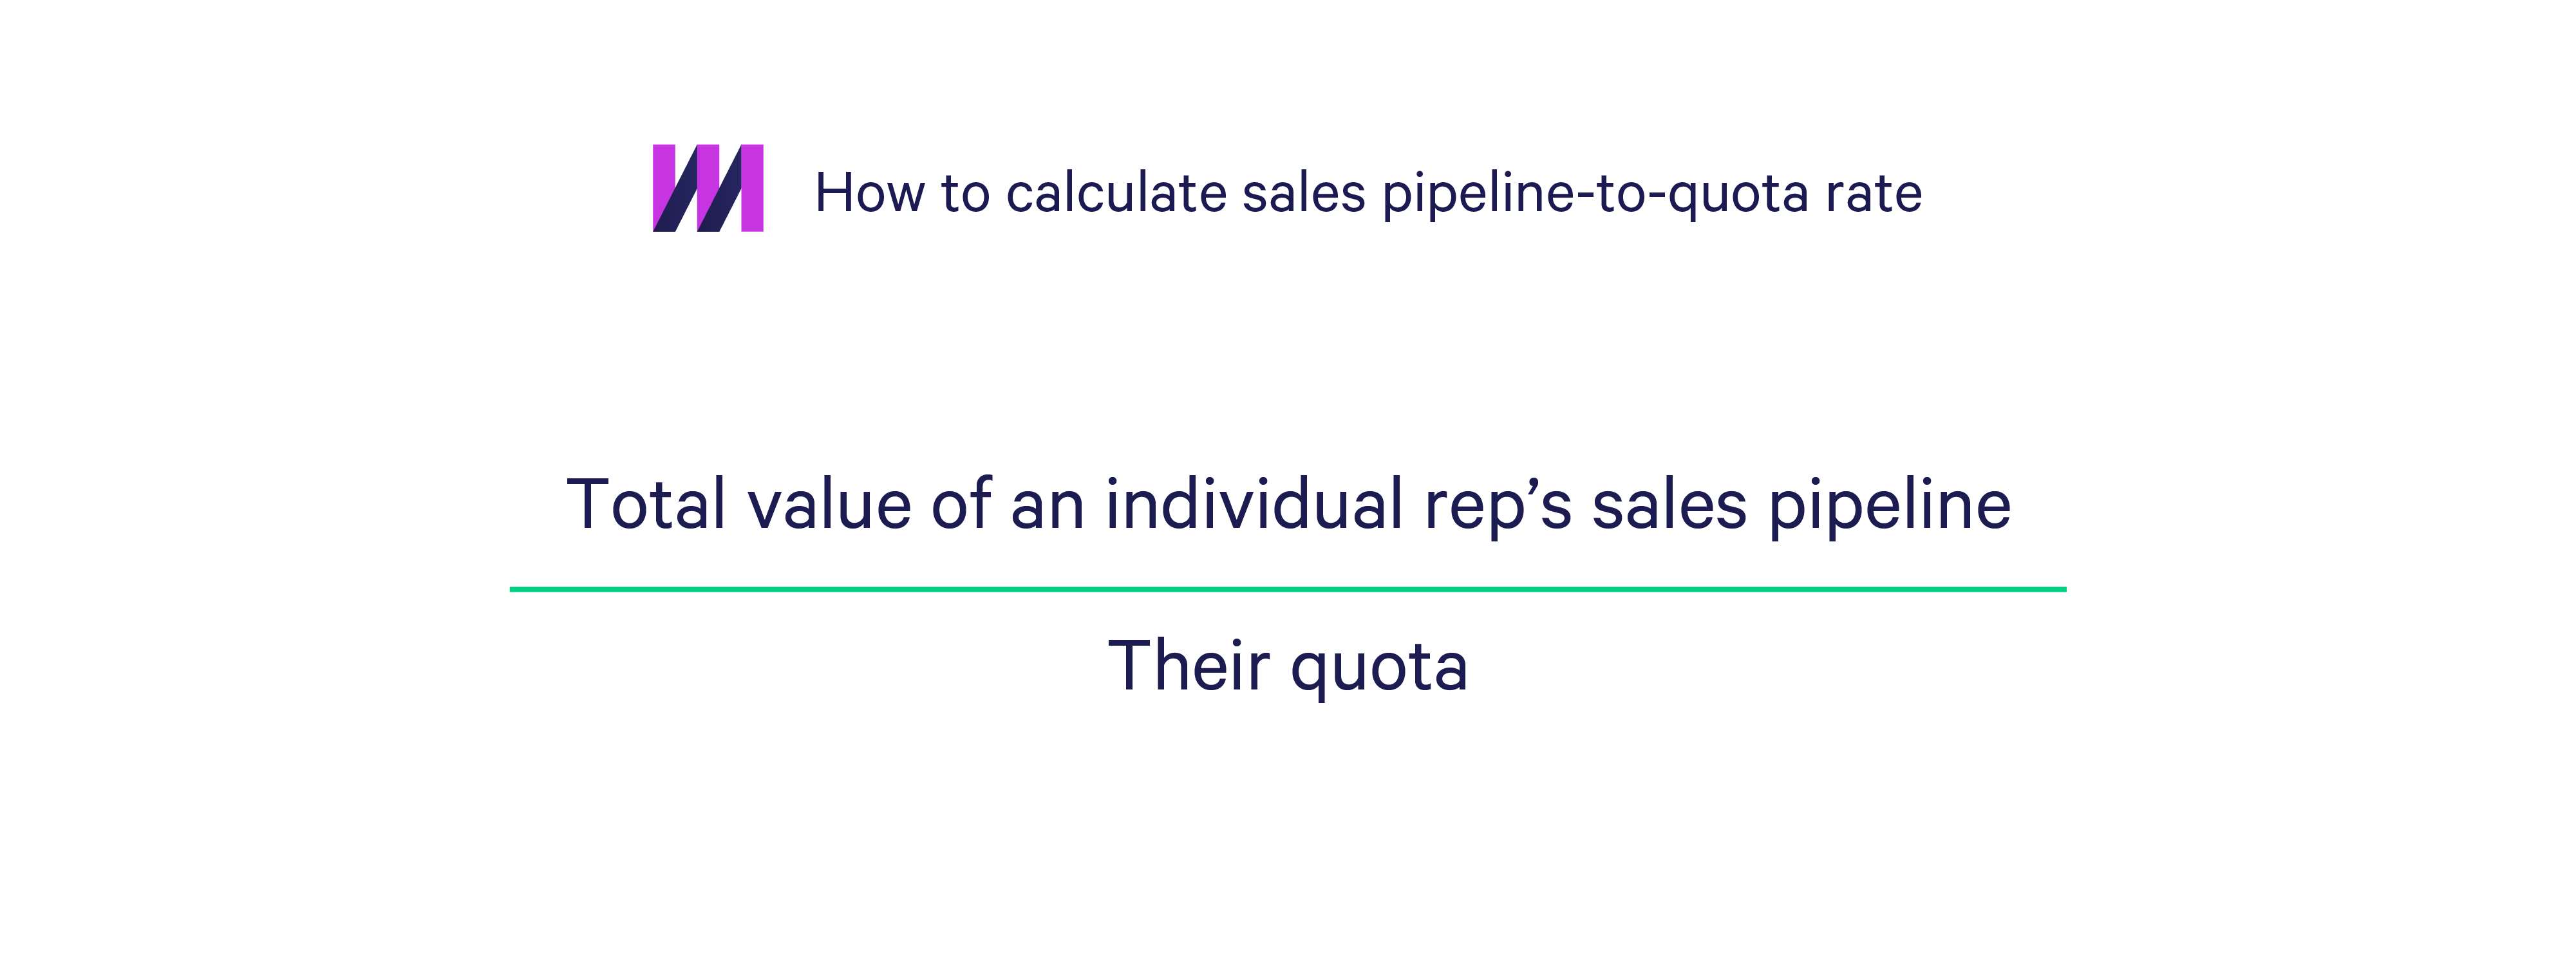 How to calculate sales pipeline-to-quota rate